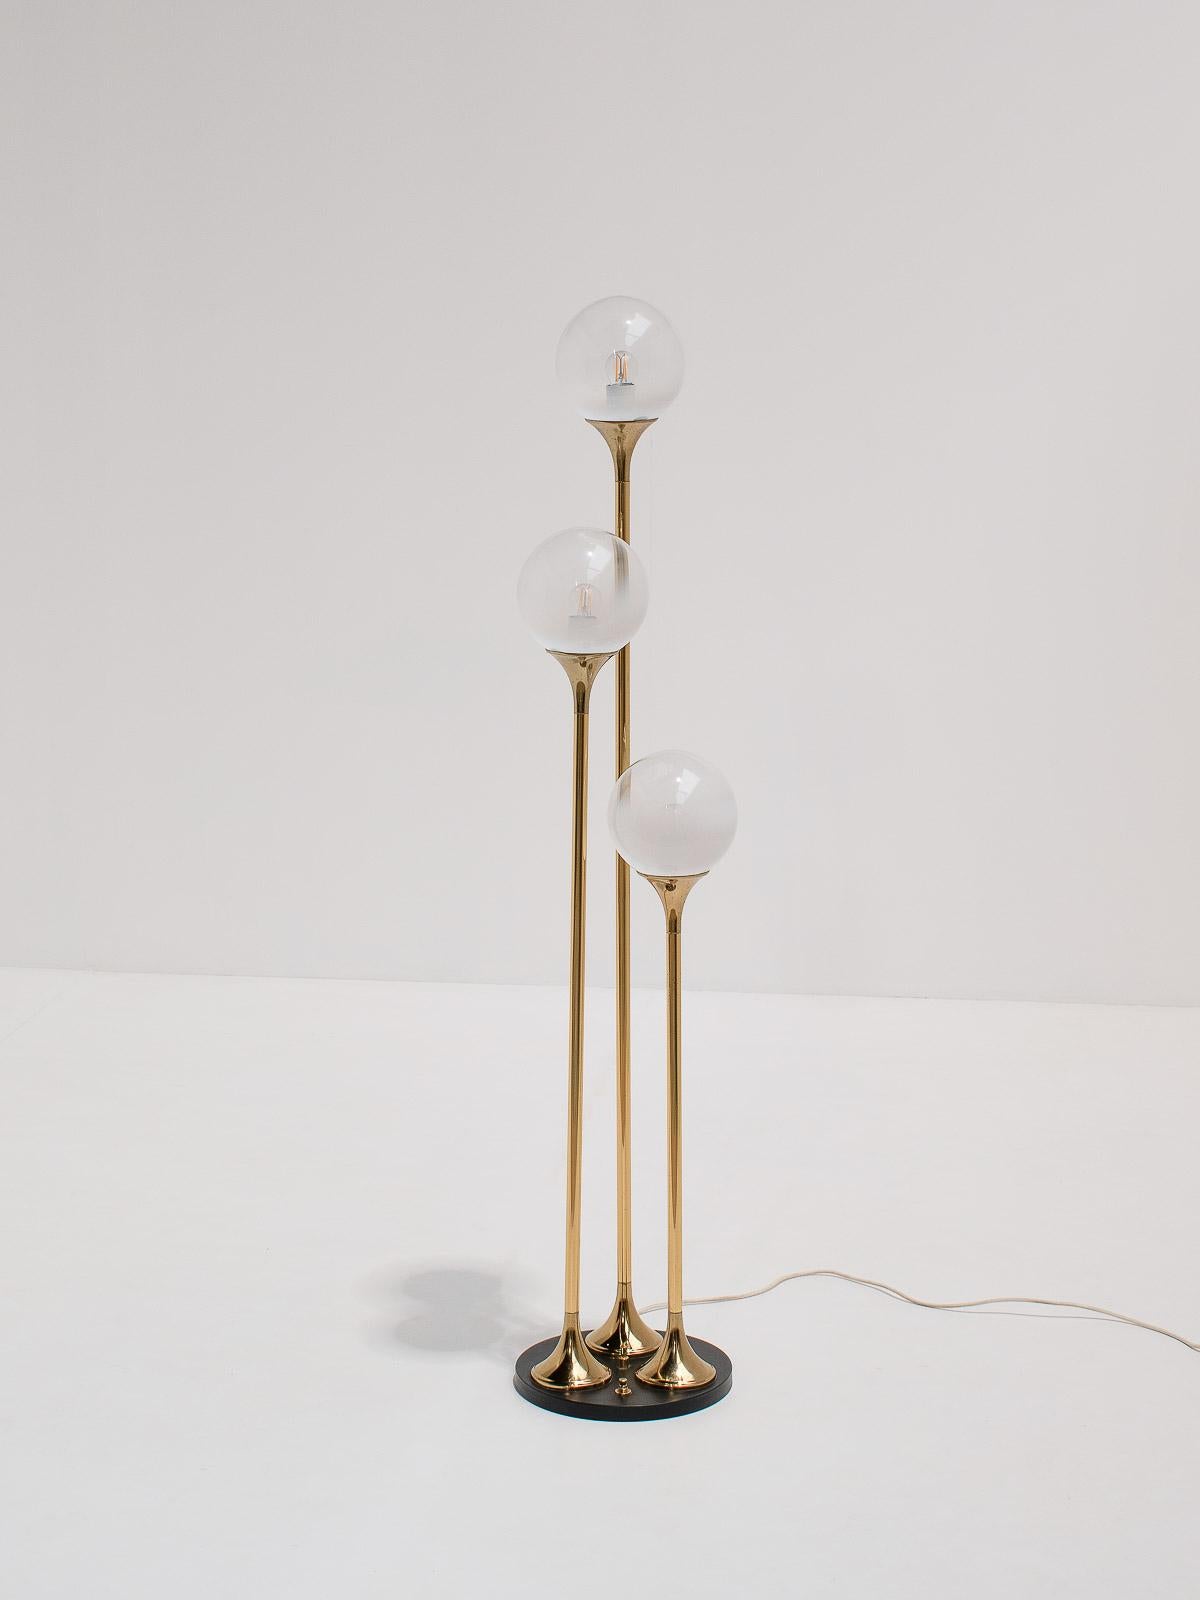 Brass Italian floor lamp by Targetti Sankey, Italy 1960s

Highly decorative mid-century floor lamp designed and manufactured in Italy in the glorious 1960s by Targetti Sankey. The black lacquered metal round base of the floor lamp supports a